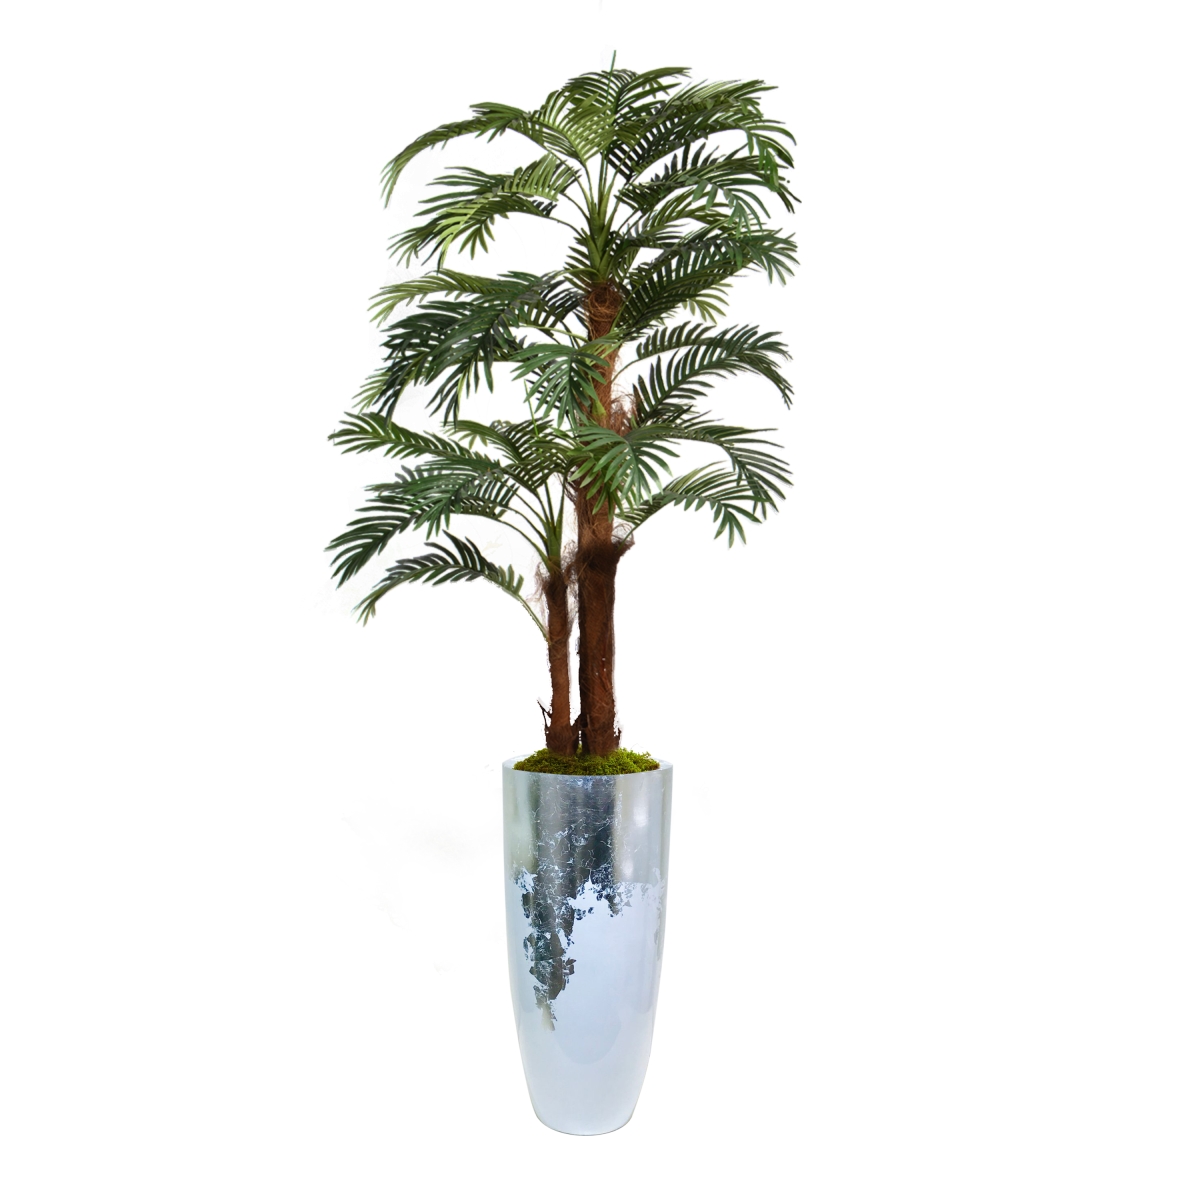 Vhx135220 87.5 In. Palm Tree Faux Decor With Burlap Kit In Silver Resin Planter